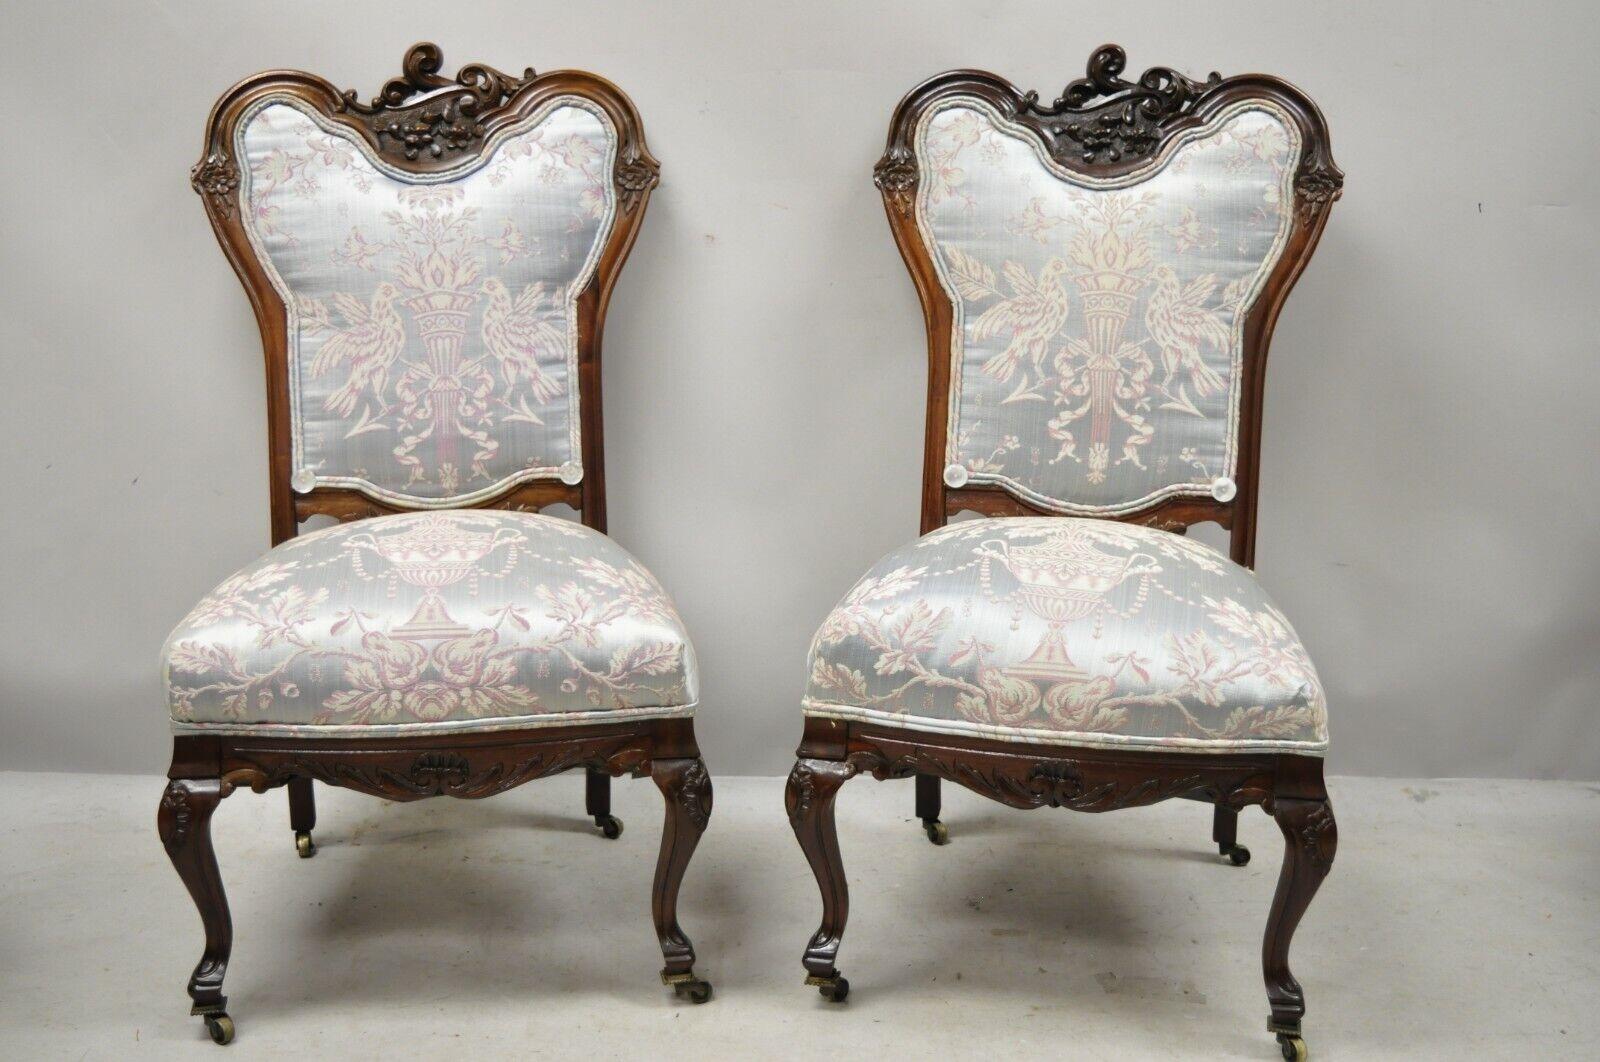 Antique Victorian Floral Scrollwork Carved Mahogany Parlor Slipper Side Chairs - a Pair. Item features floral scrollwork carved frame, brass rolling casters, solid wood frame, upholstered backs, nicely carved details. Frames look to have been